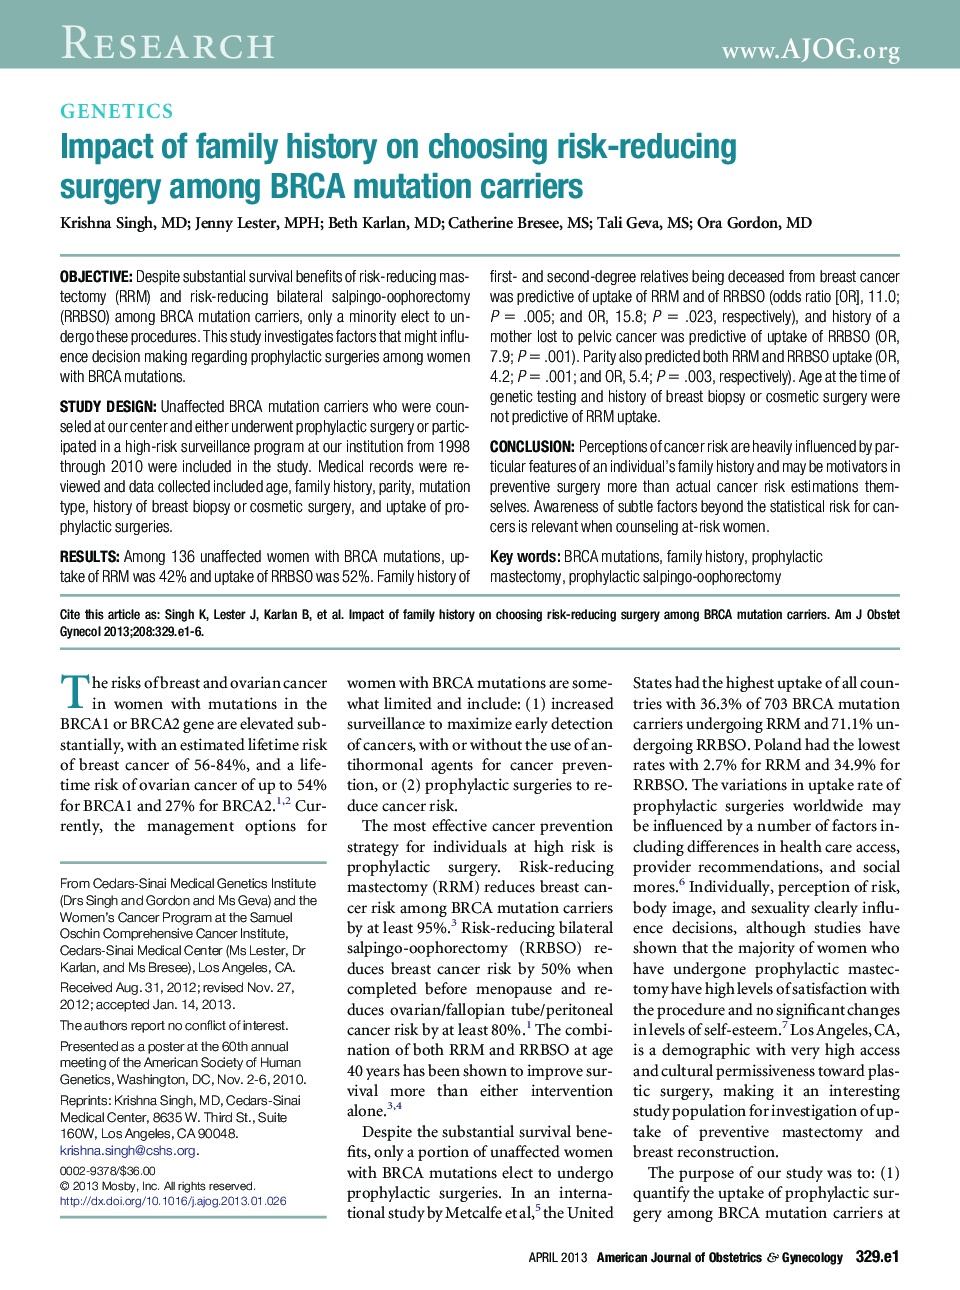 Impact of family history on choosing risk-reducing surgery among BRCA mutation carriers